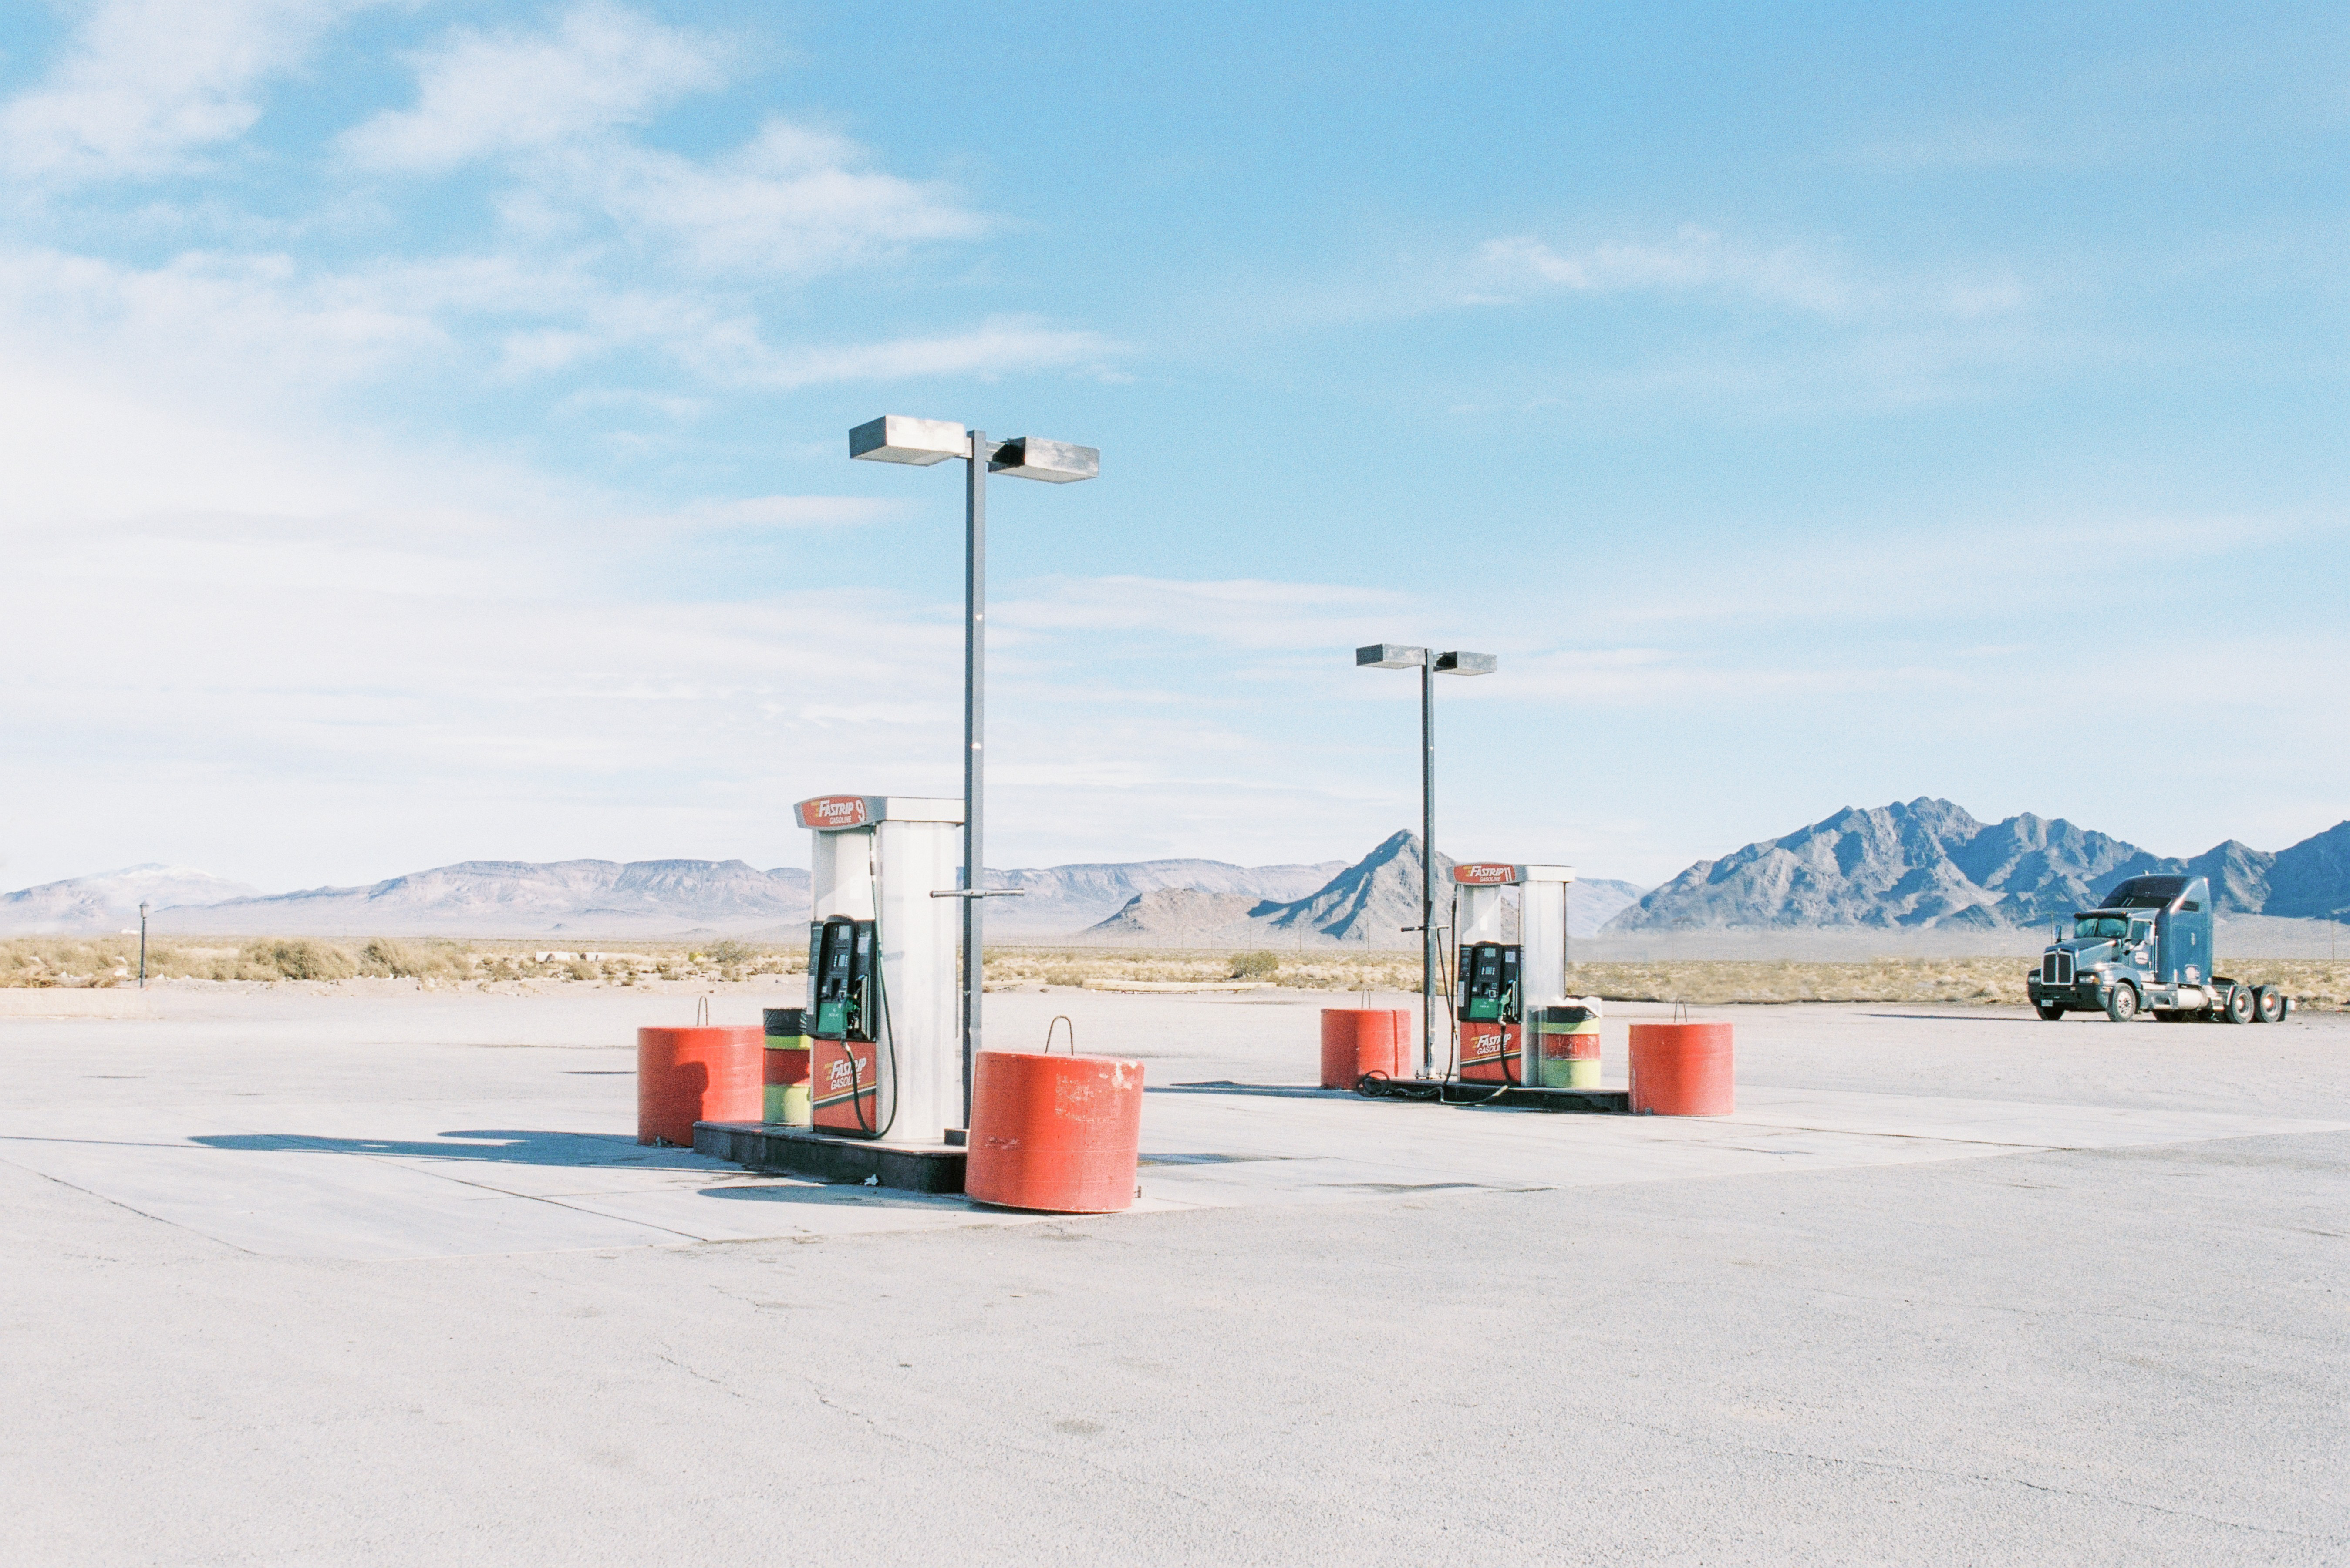 Johannes’ love of Americana pours out of his striking landscape photography